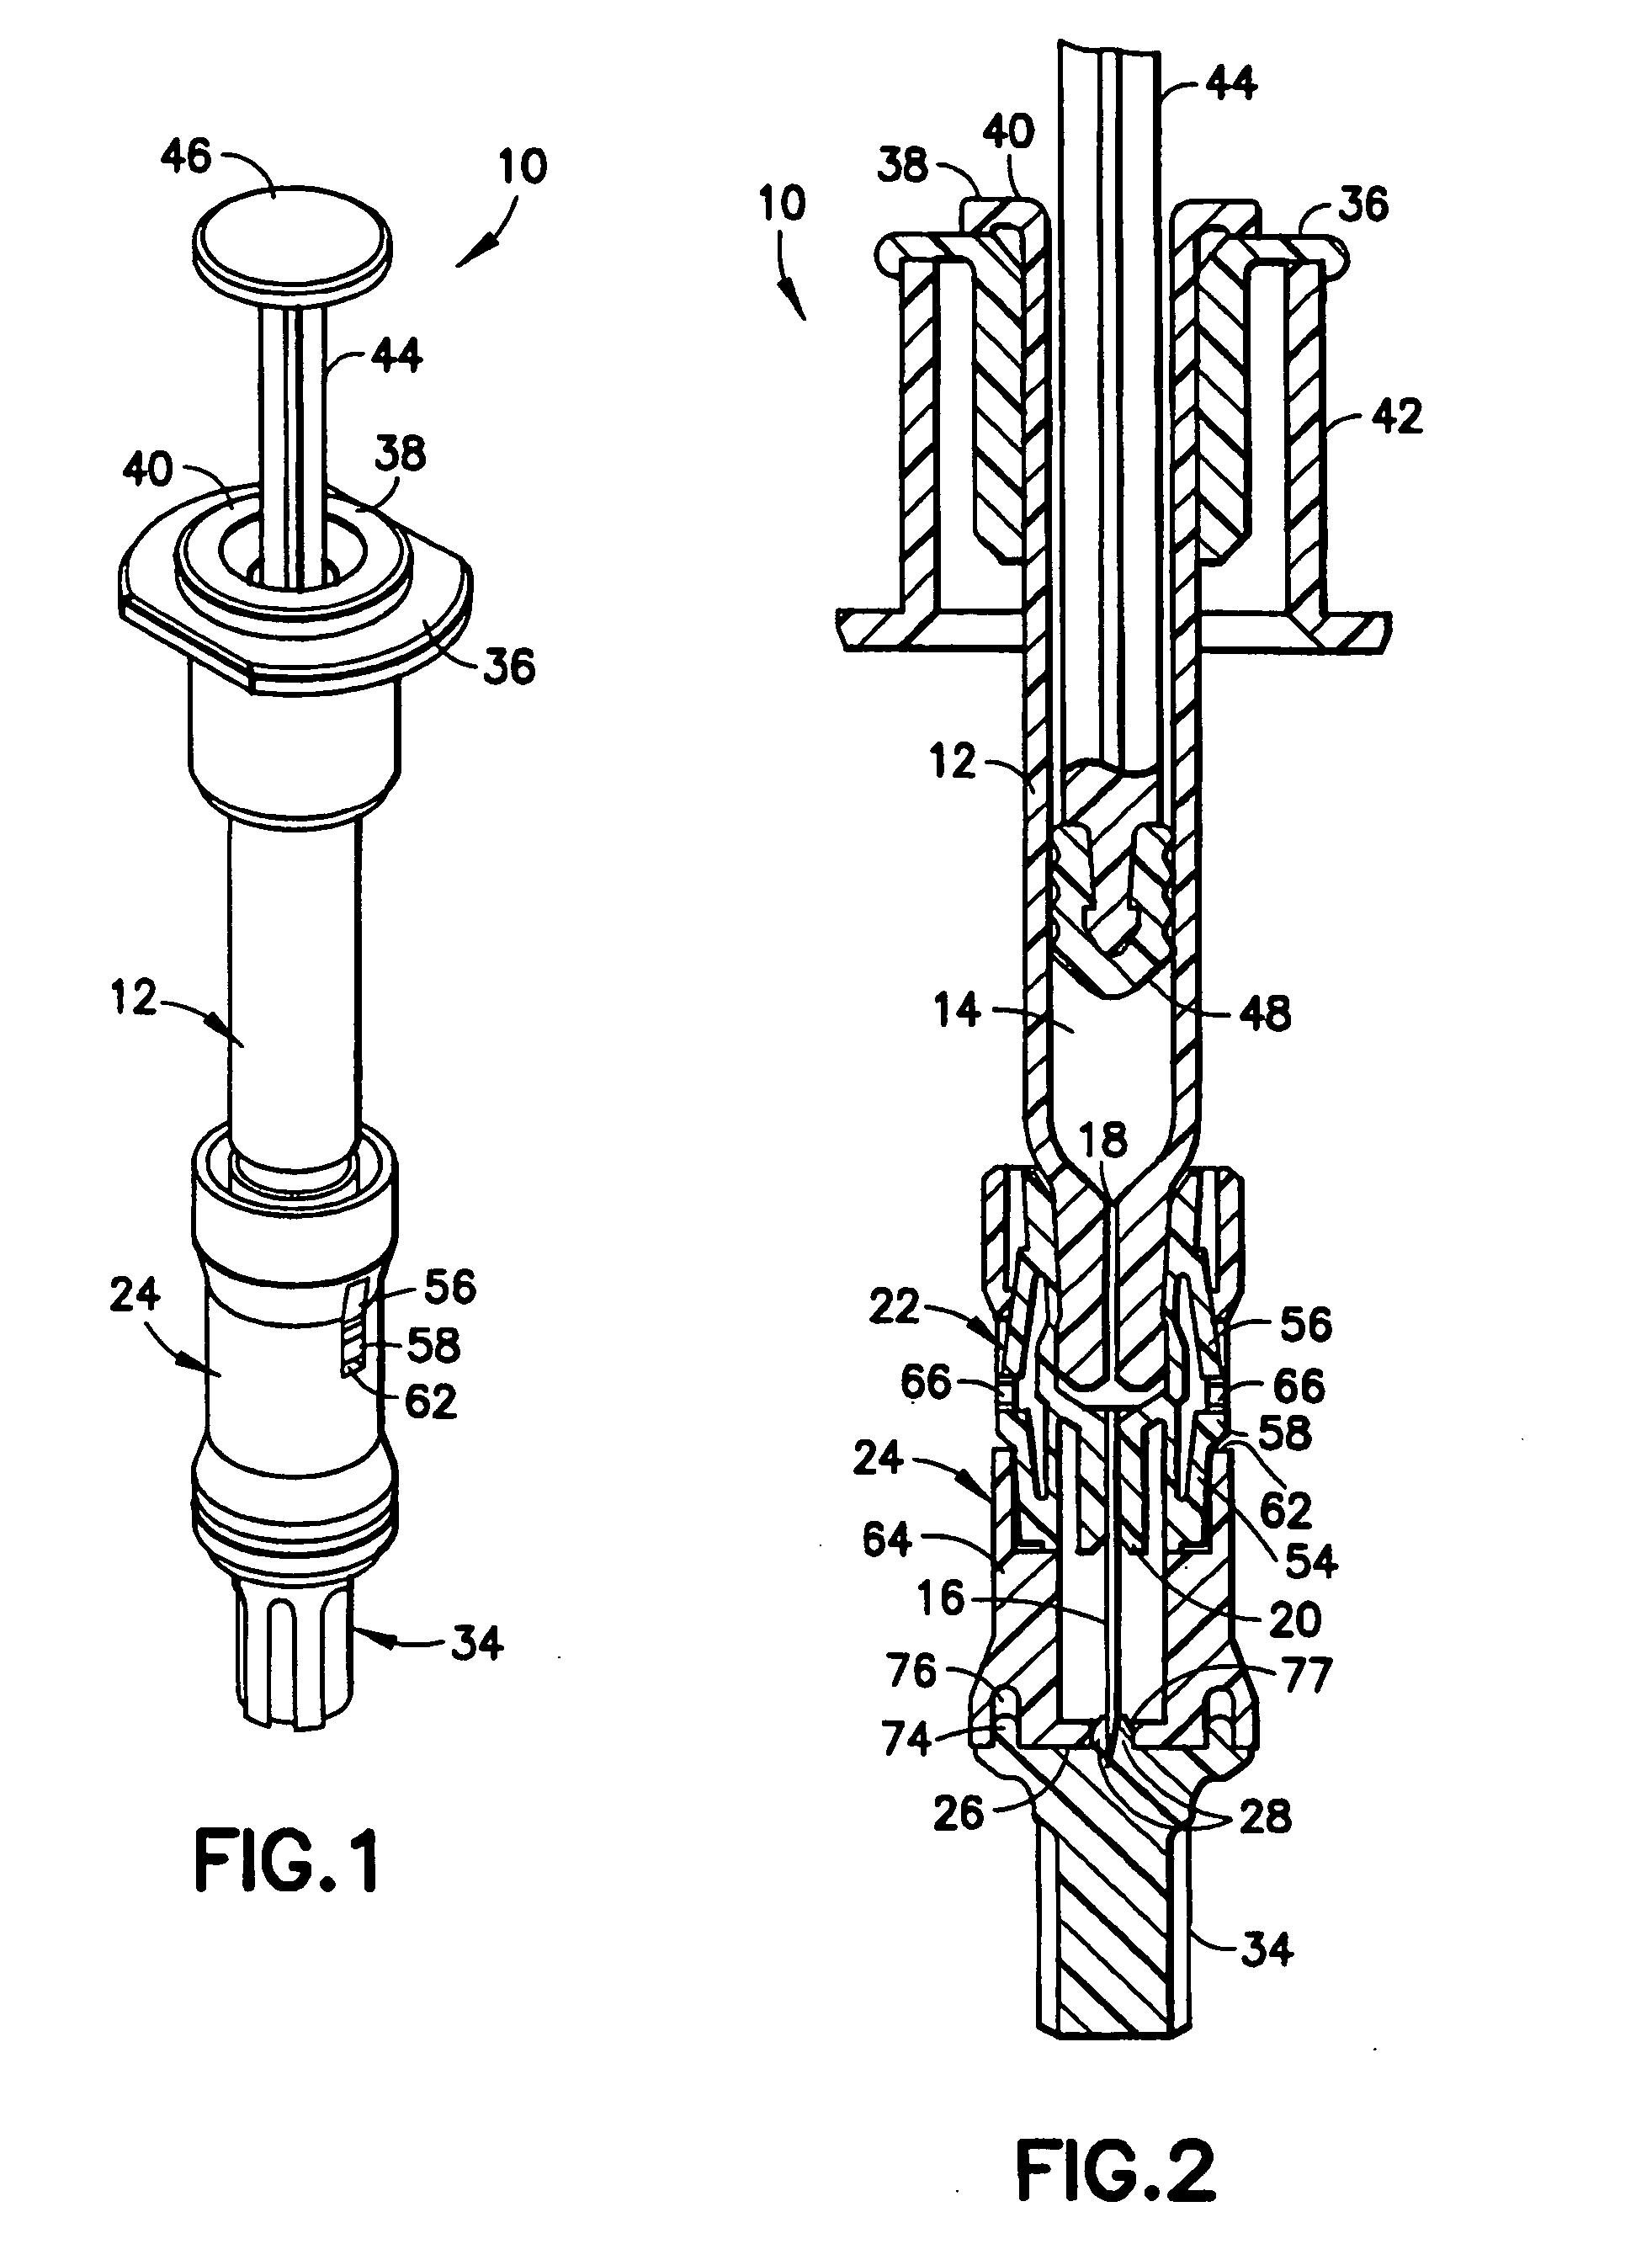 Prefillable intradermal delivery device